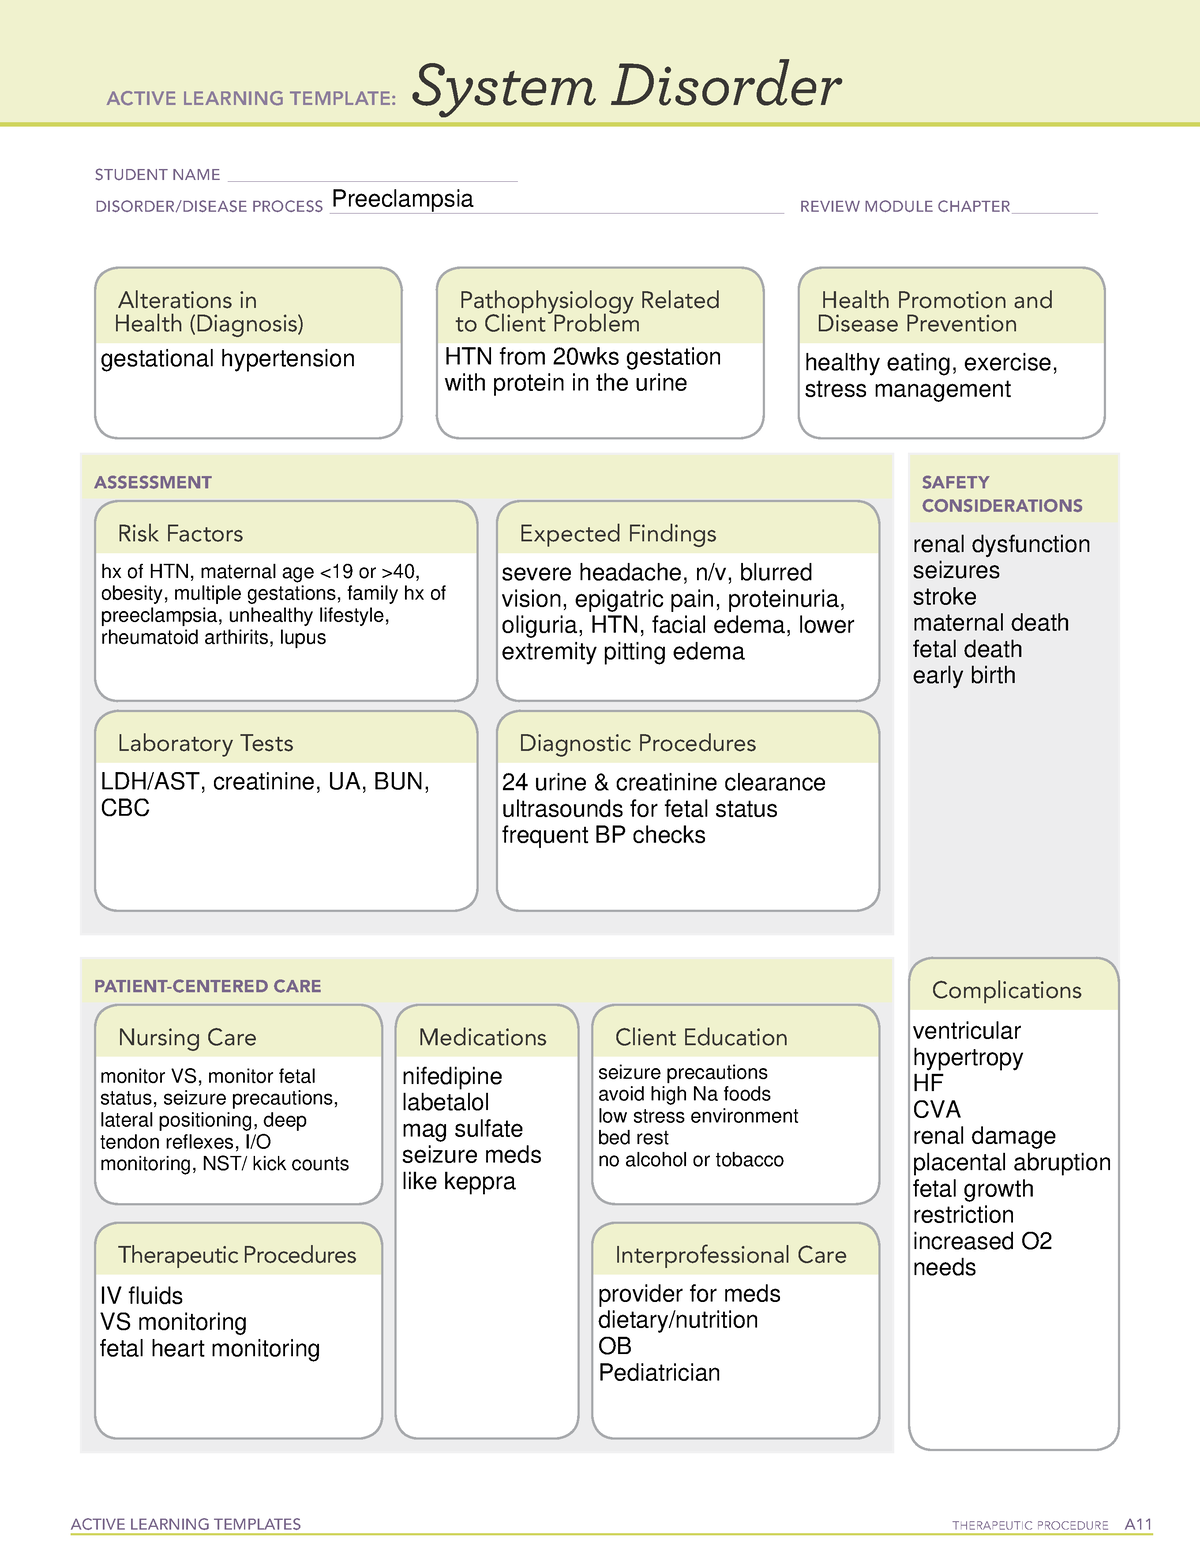 Preeclampsia ATI System Disorder Notes ACTIVE LEARNING TEMPLATES